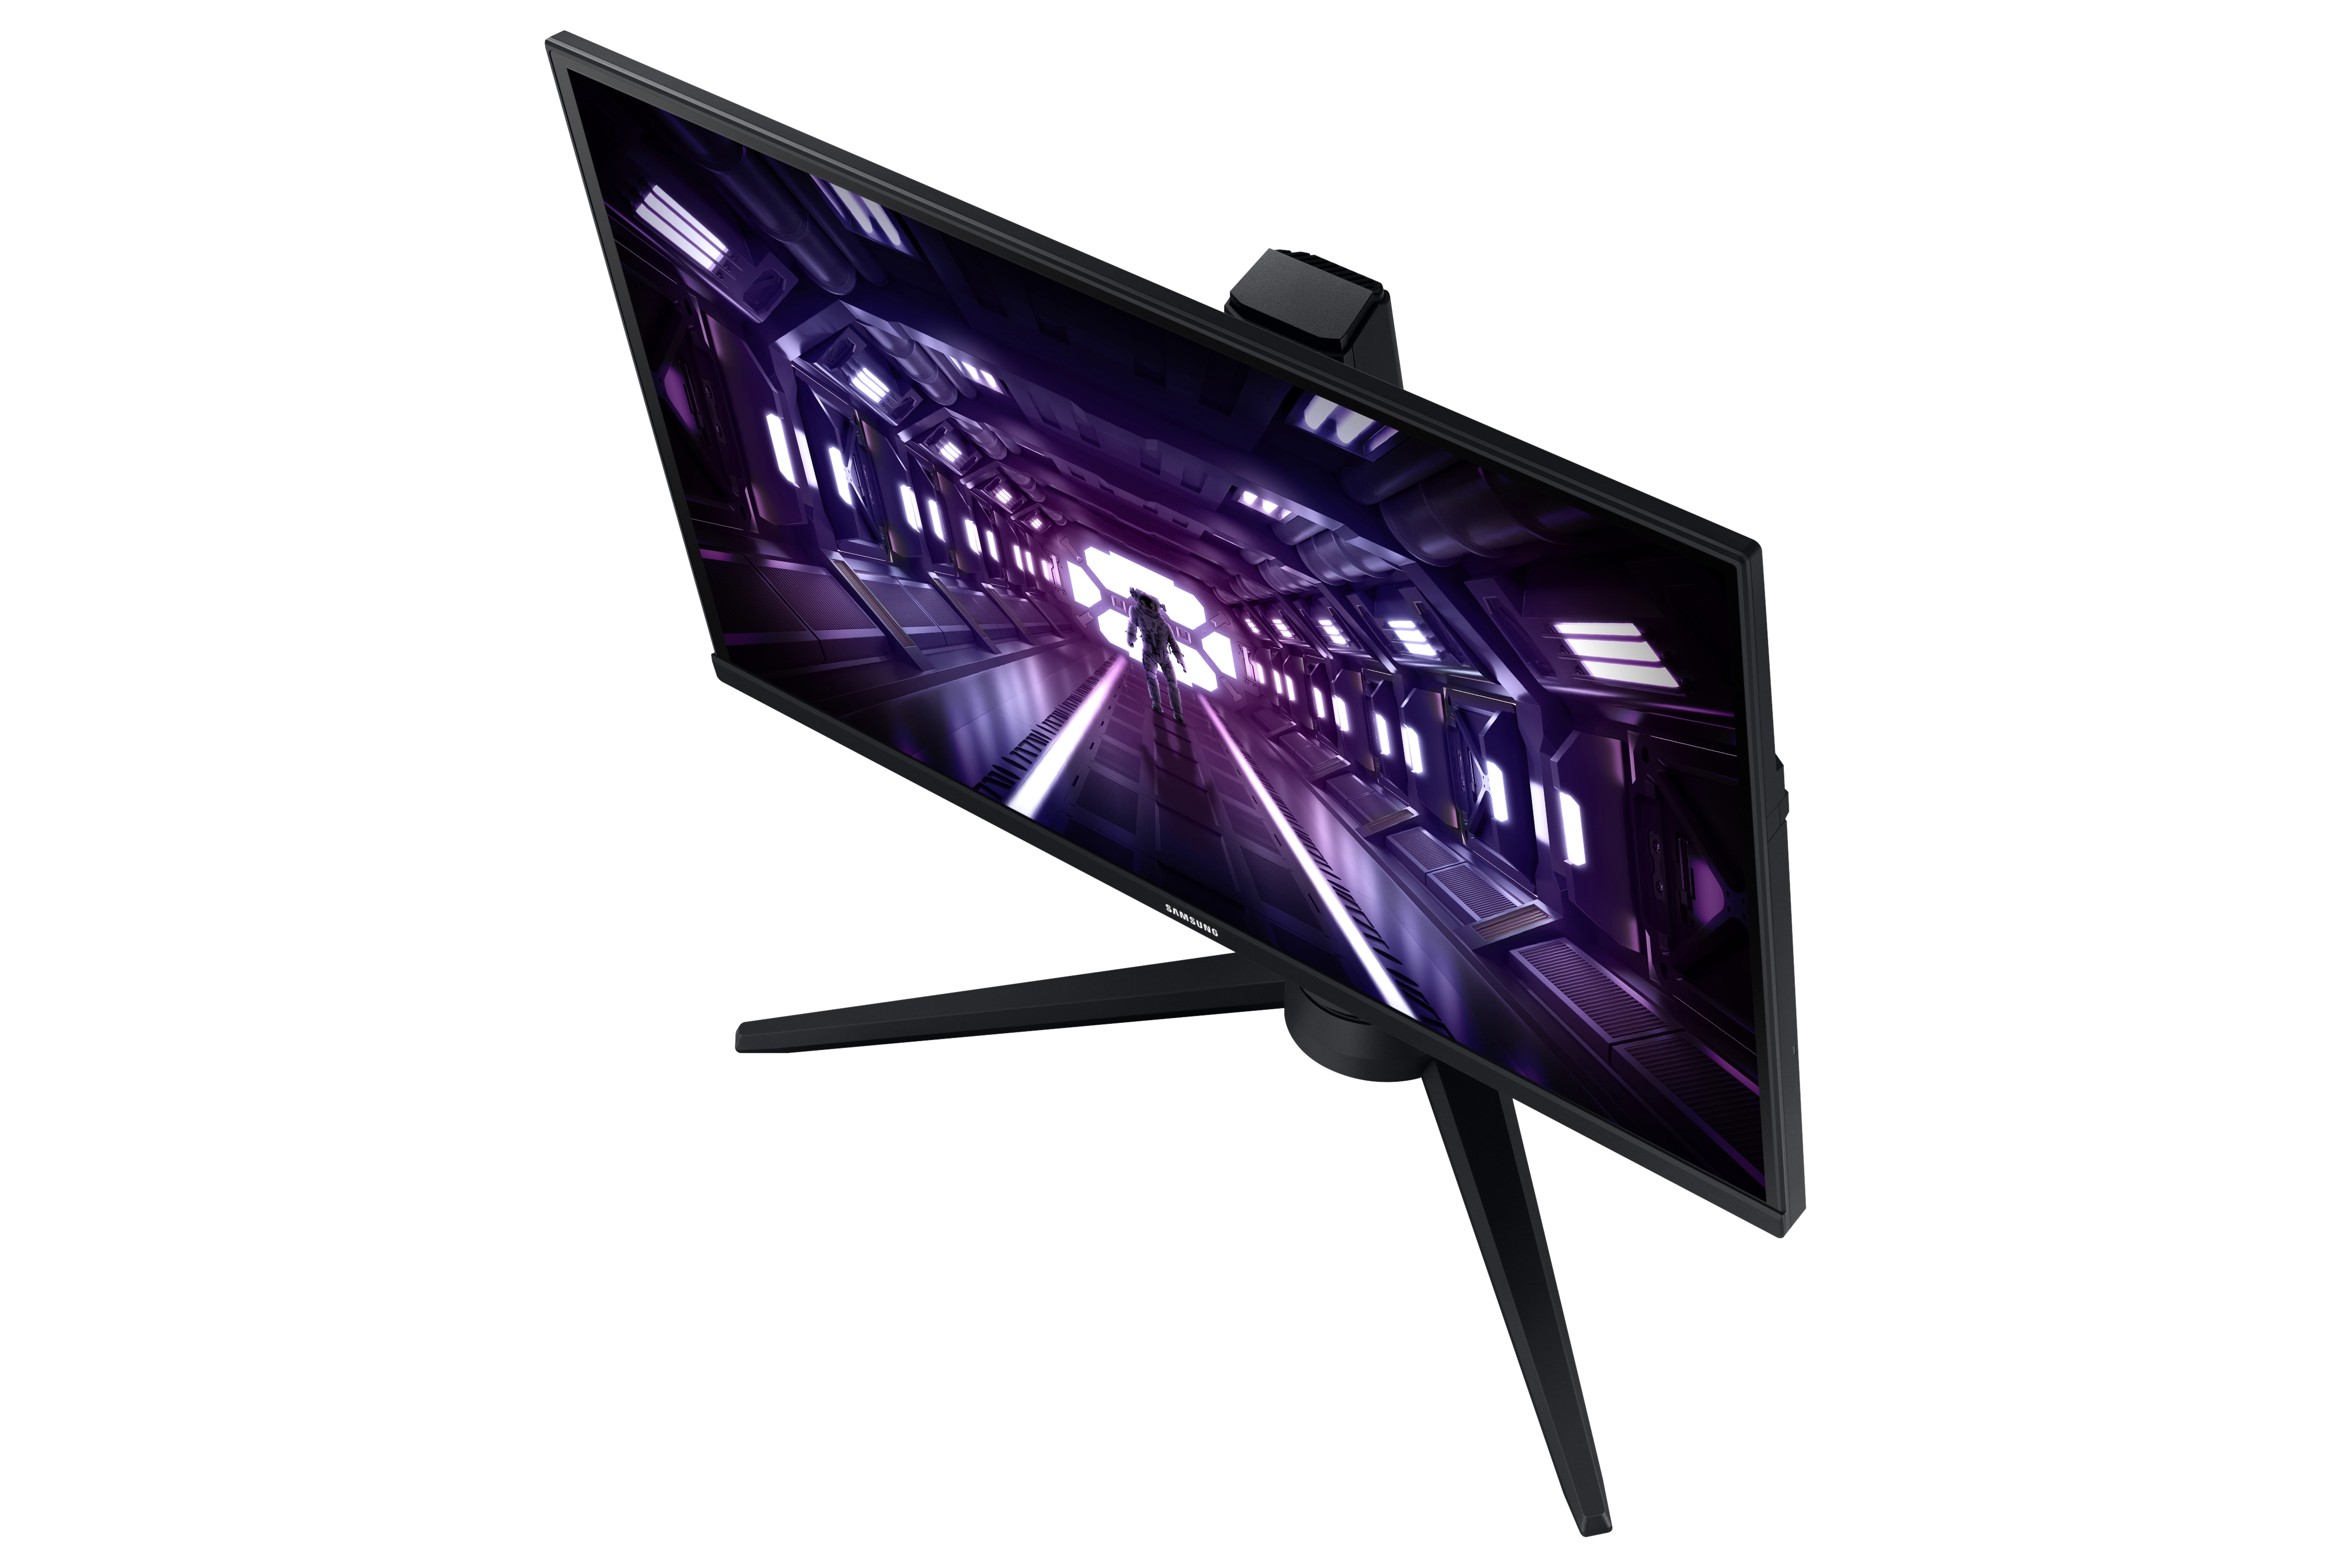 SAMSUNG Odyssey G3 Series 27-inch FHD 1080p Gaming Monitor, 144Hz, 1ms,  Height Adjustable Stand, 3-Sided Border-Less, FreeSync Premium, with MTC  HDMI